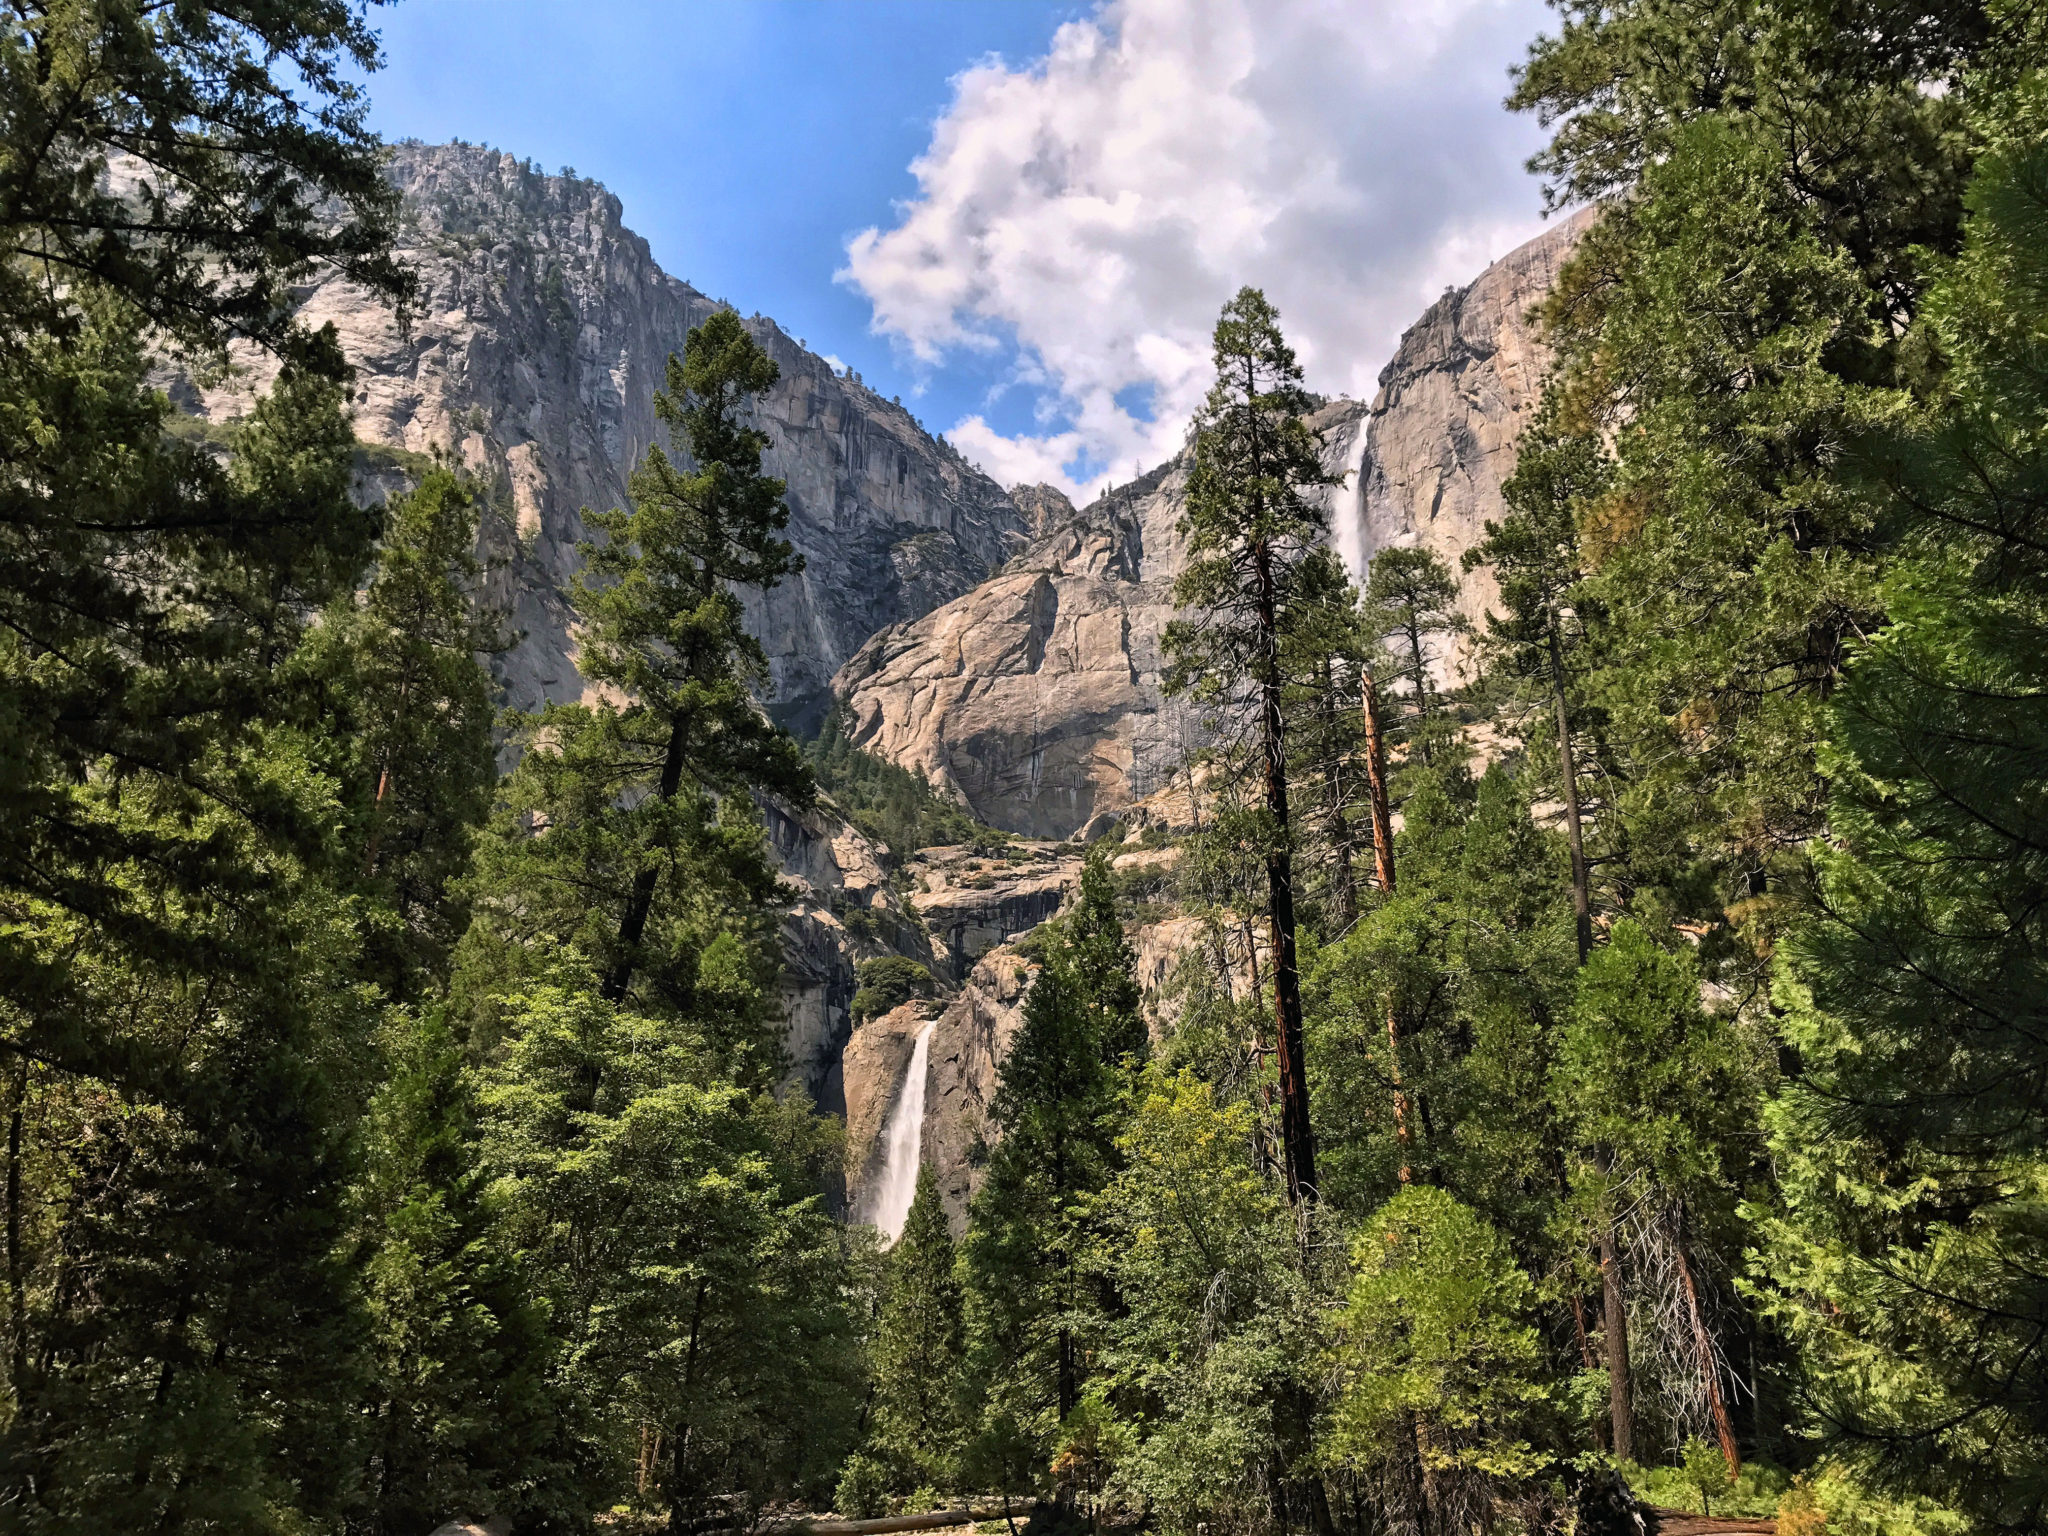 View of Lower and Upper Yosemite Falls